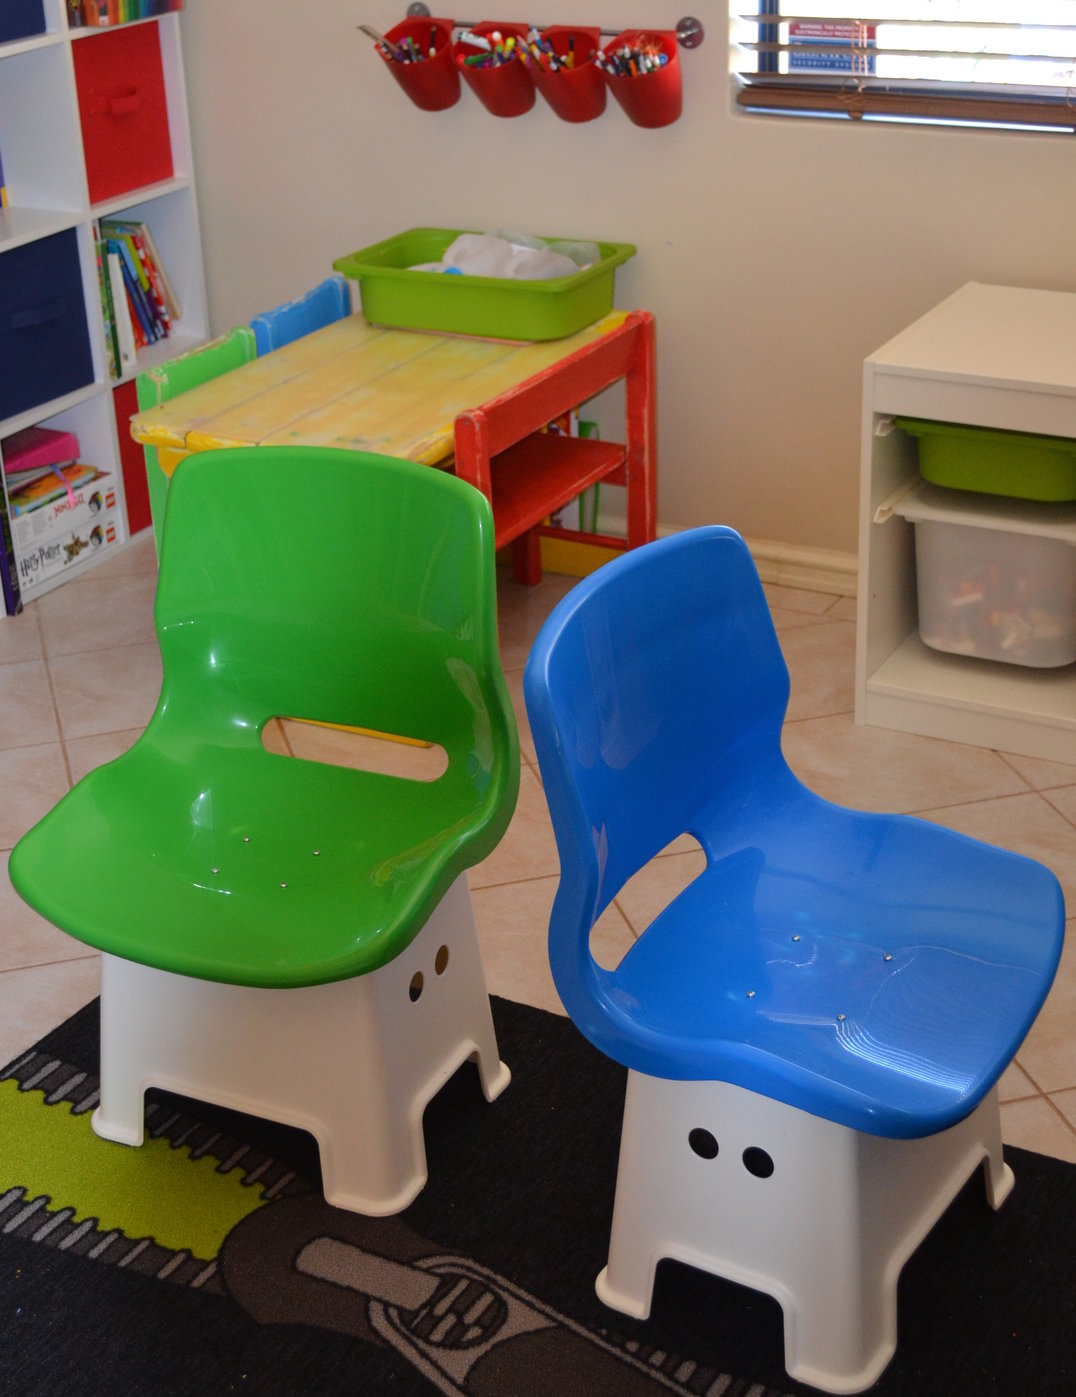 two white step stools have a blue and green seat attached to them to form a chair.